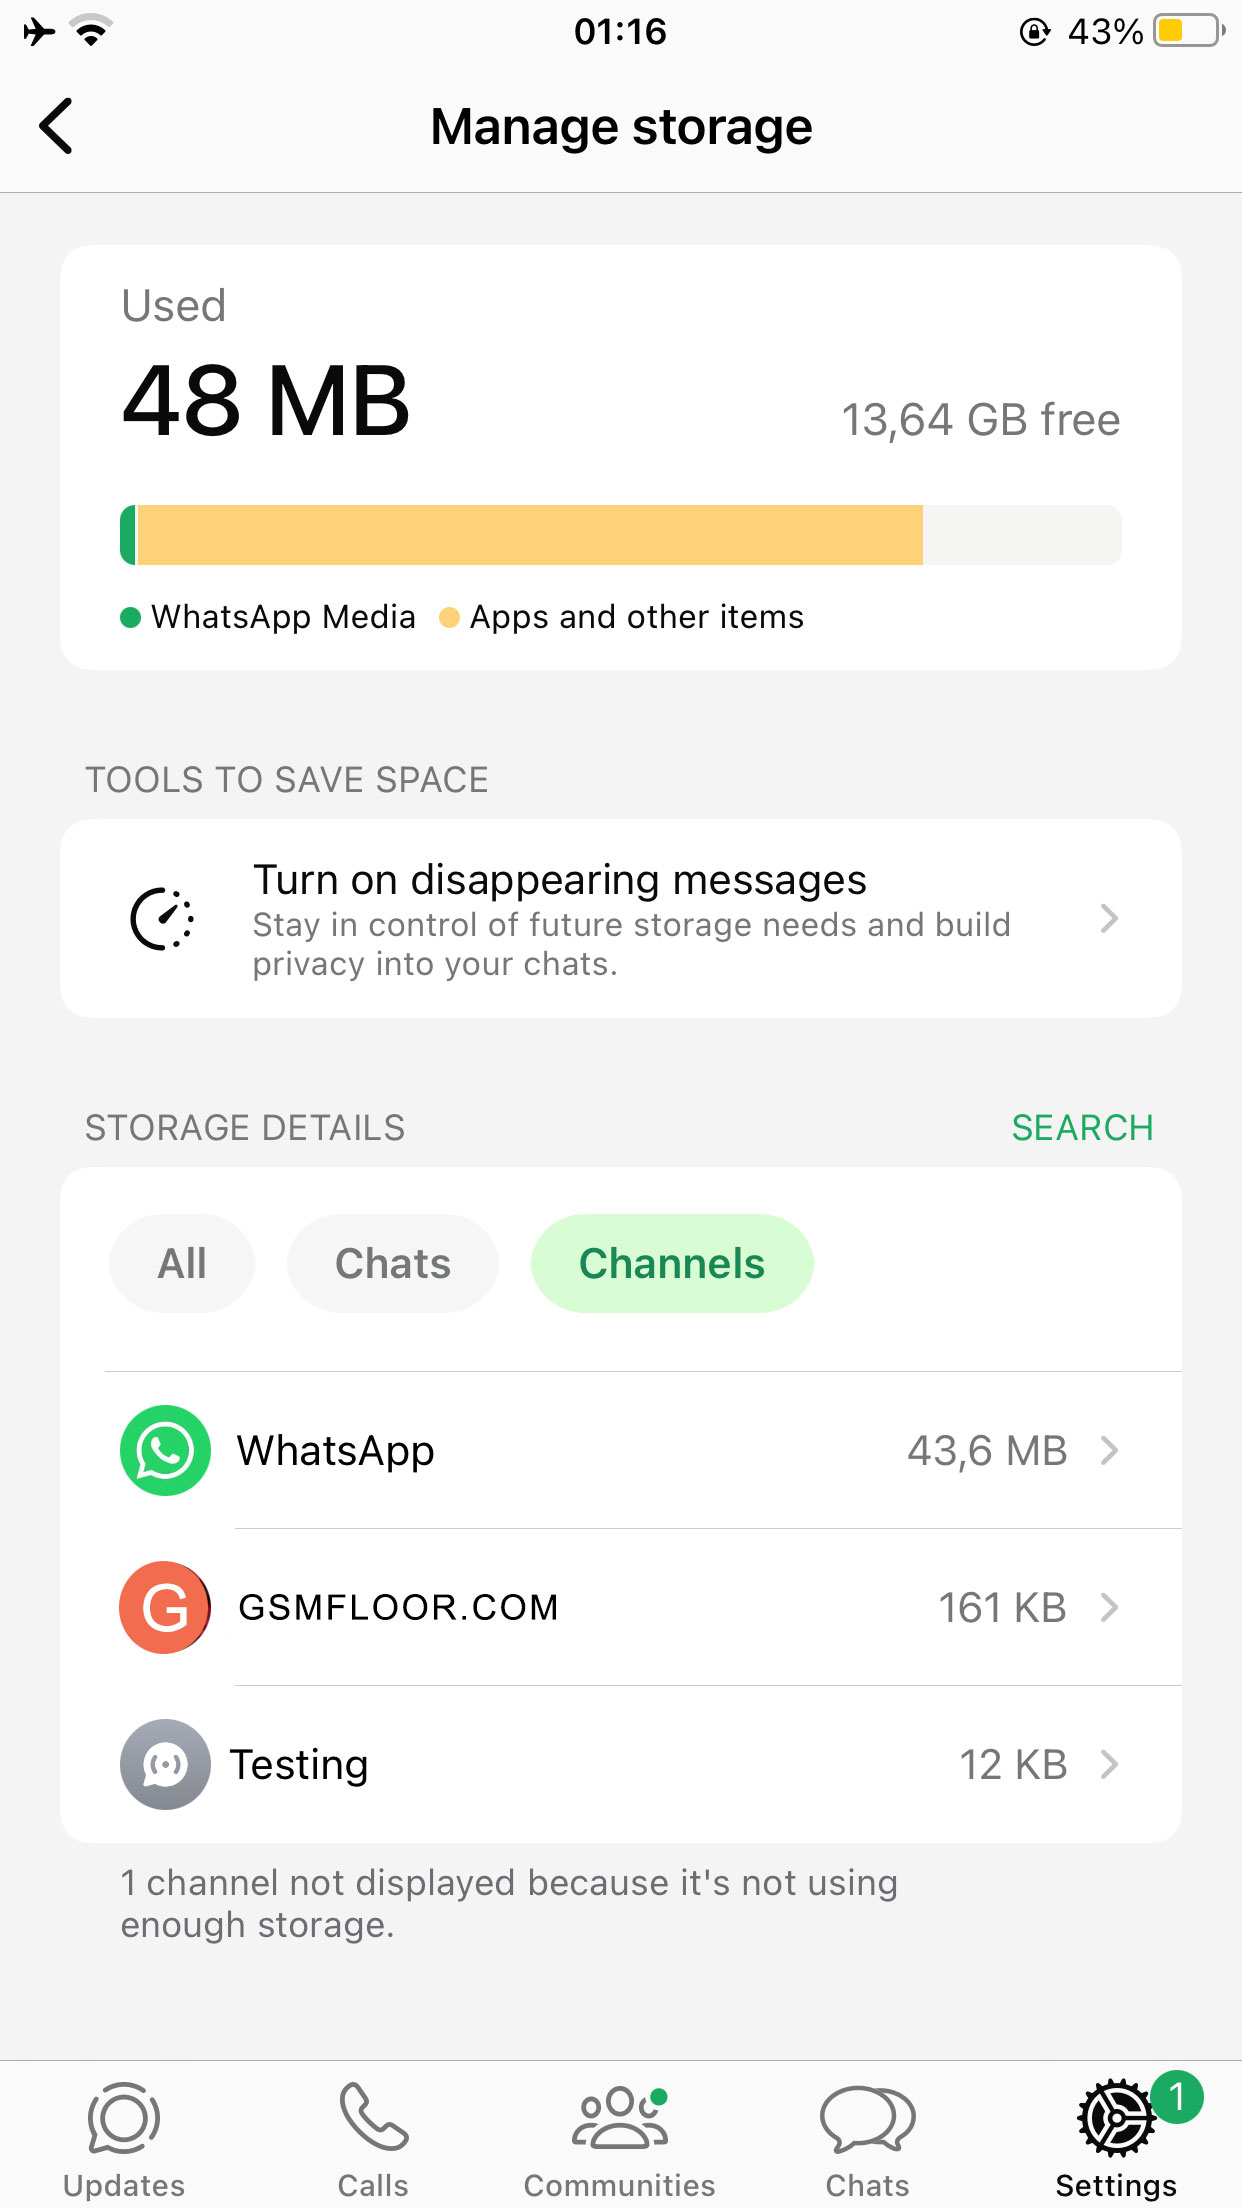 how to make whatsapp channel?
